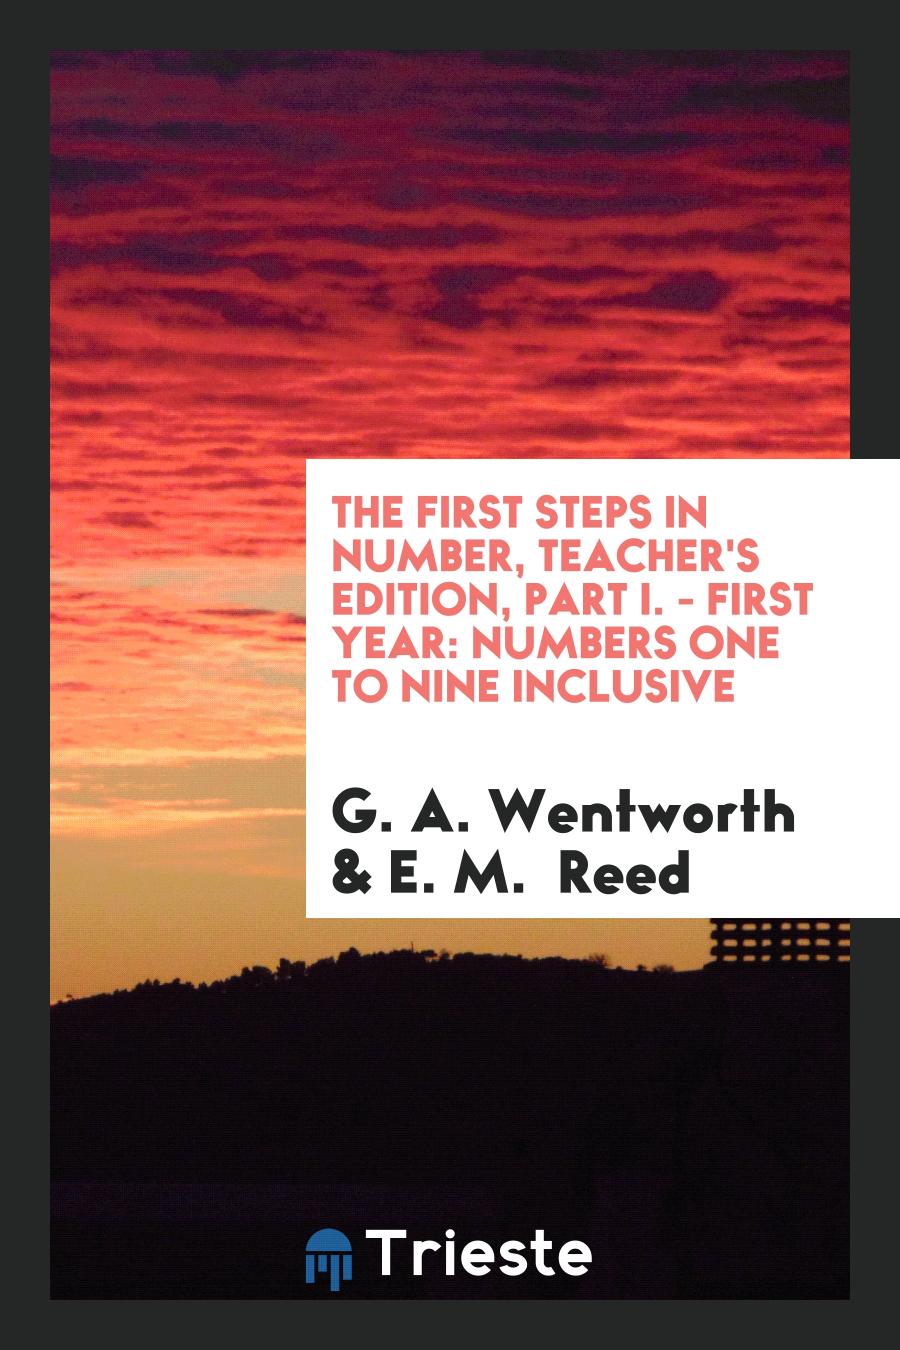 The First Steps in Number, Teacher's Edition, Part I. - First Year: Numbers One to Nine Inclusive